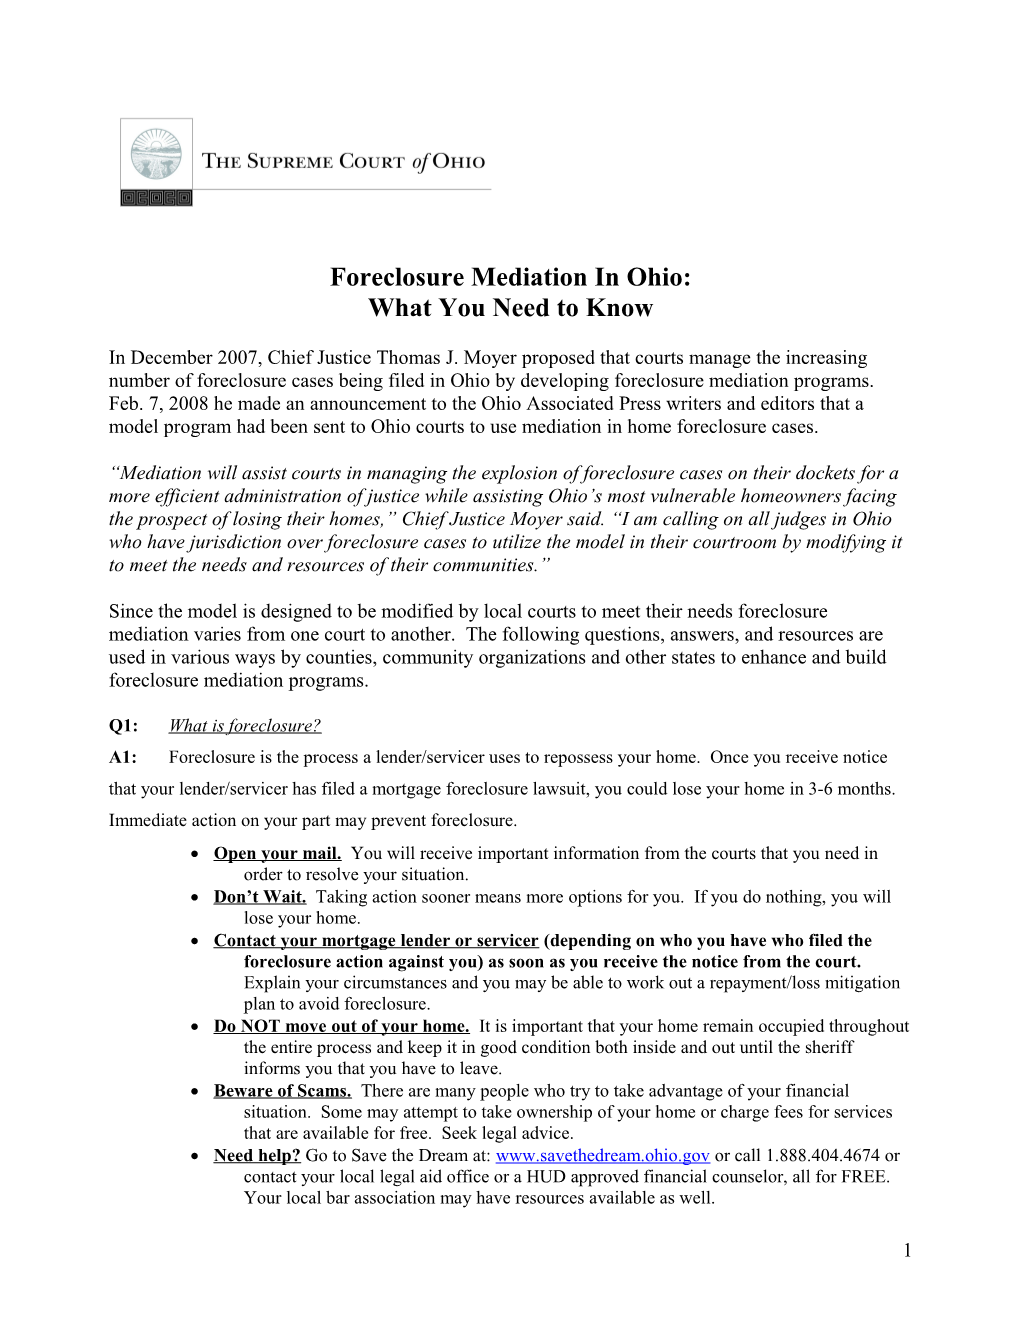 Foreclosure Mediation: Frequently Asked Questions